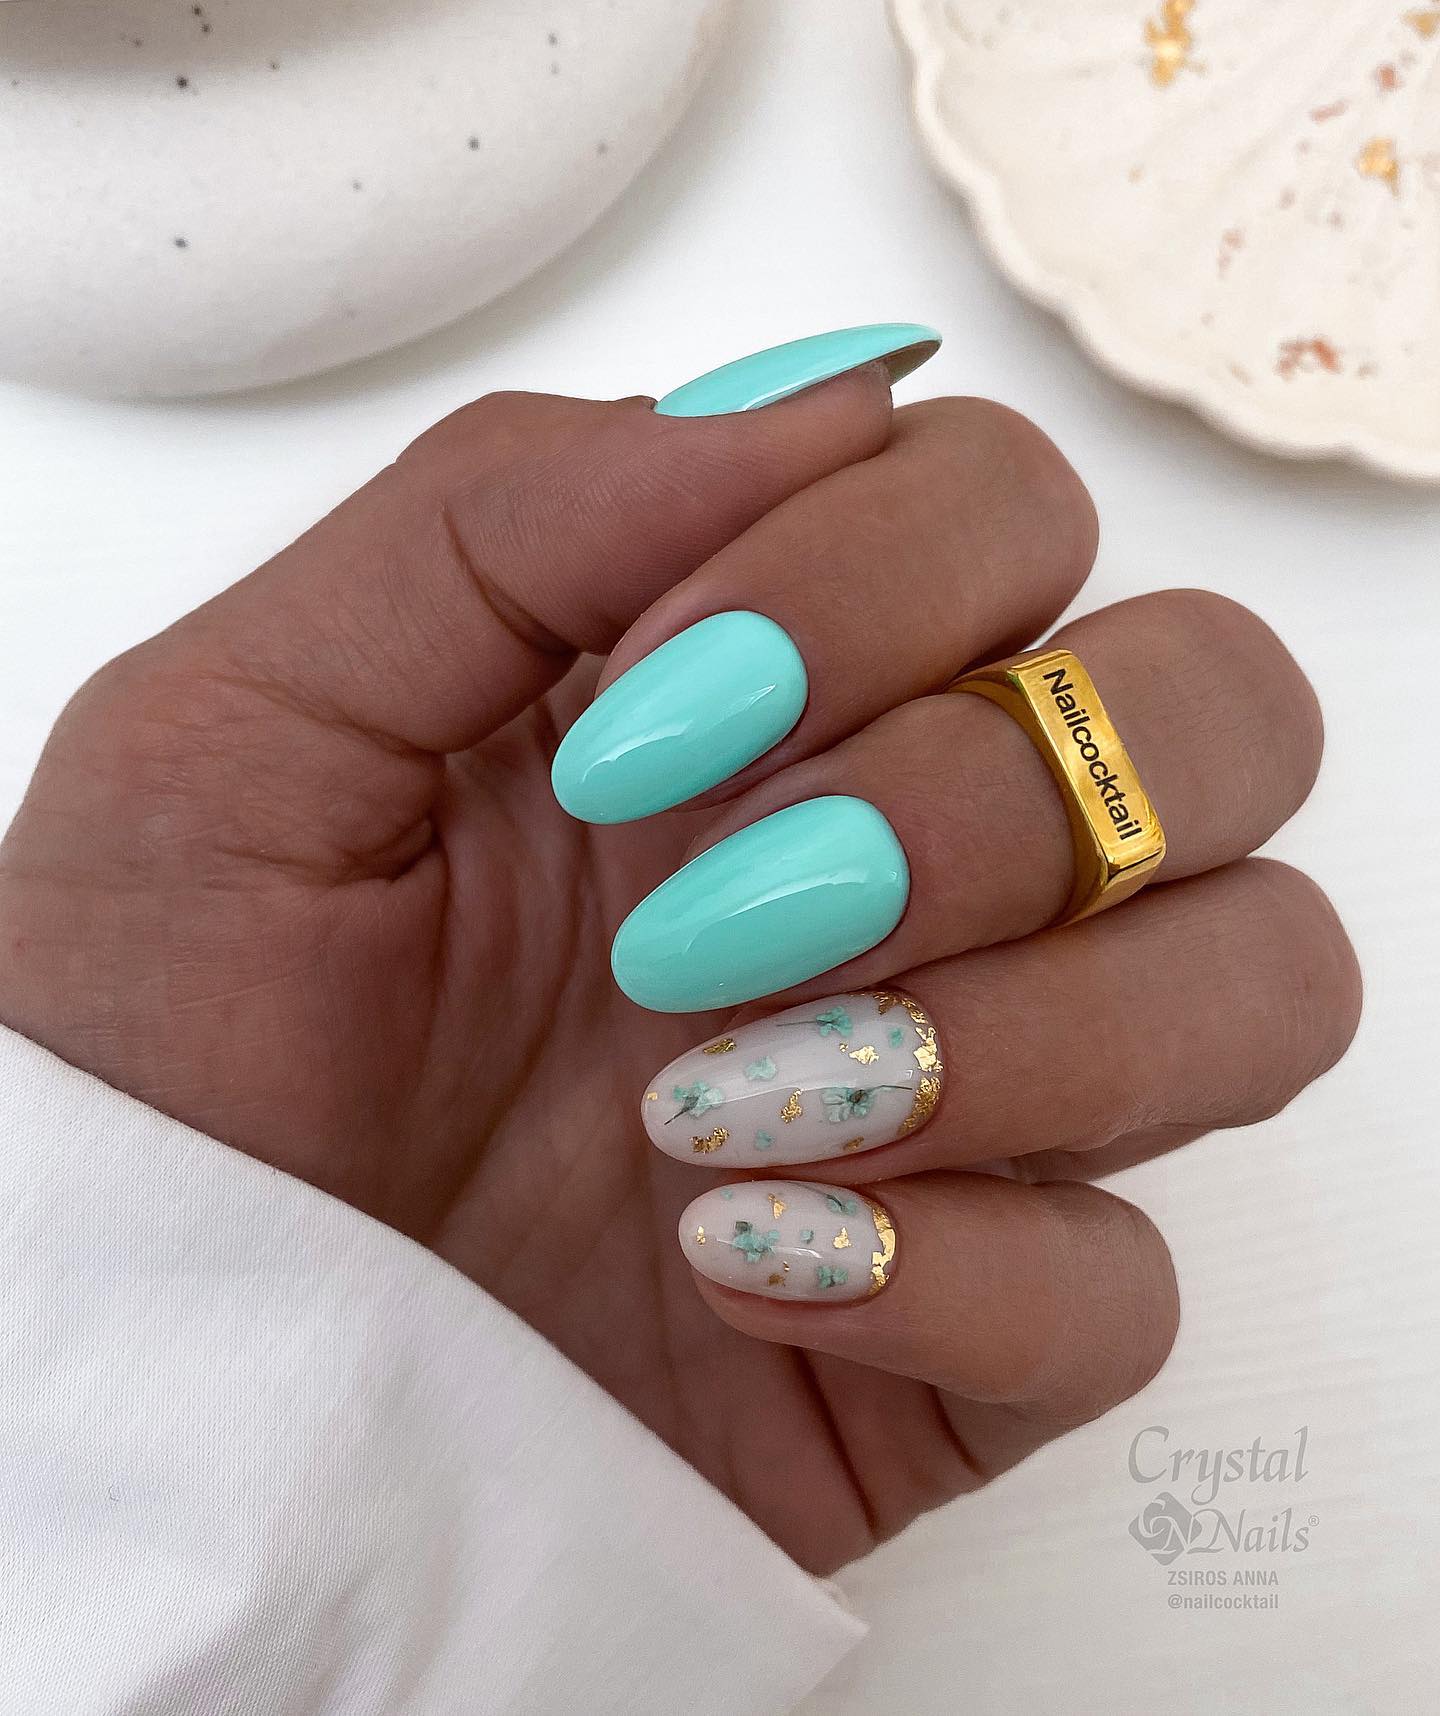 Short Tiffany Blue Nails with Floral Design